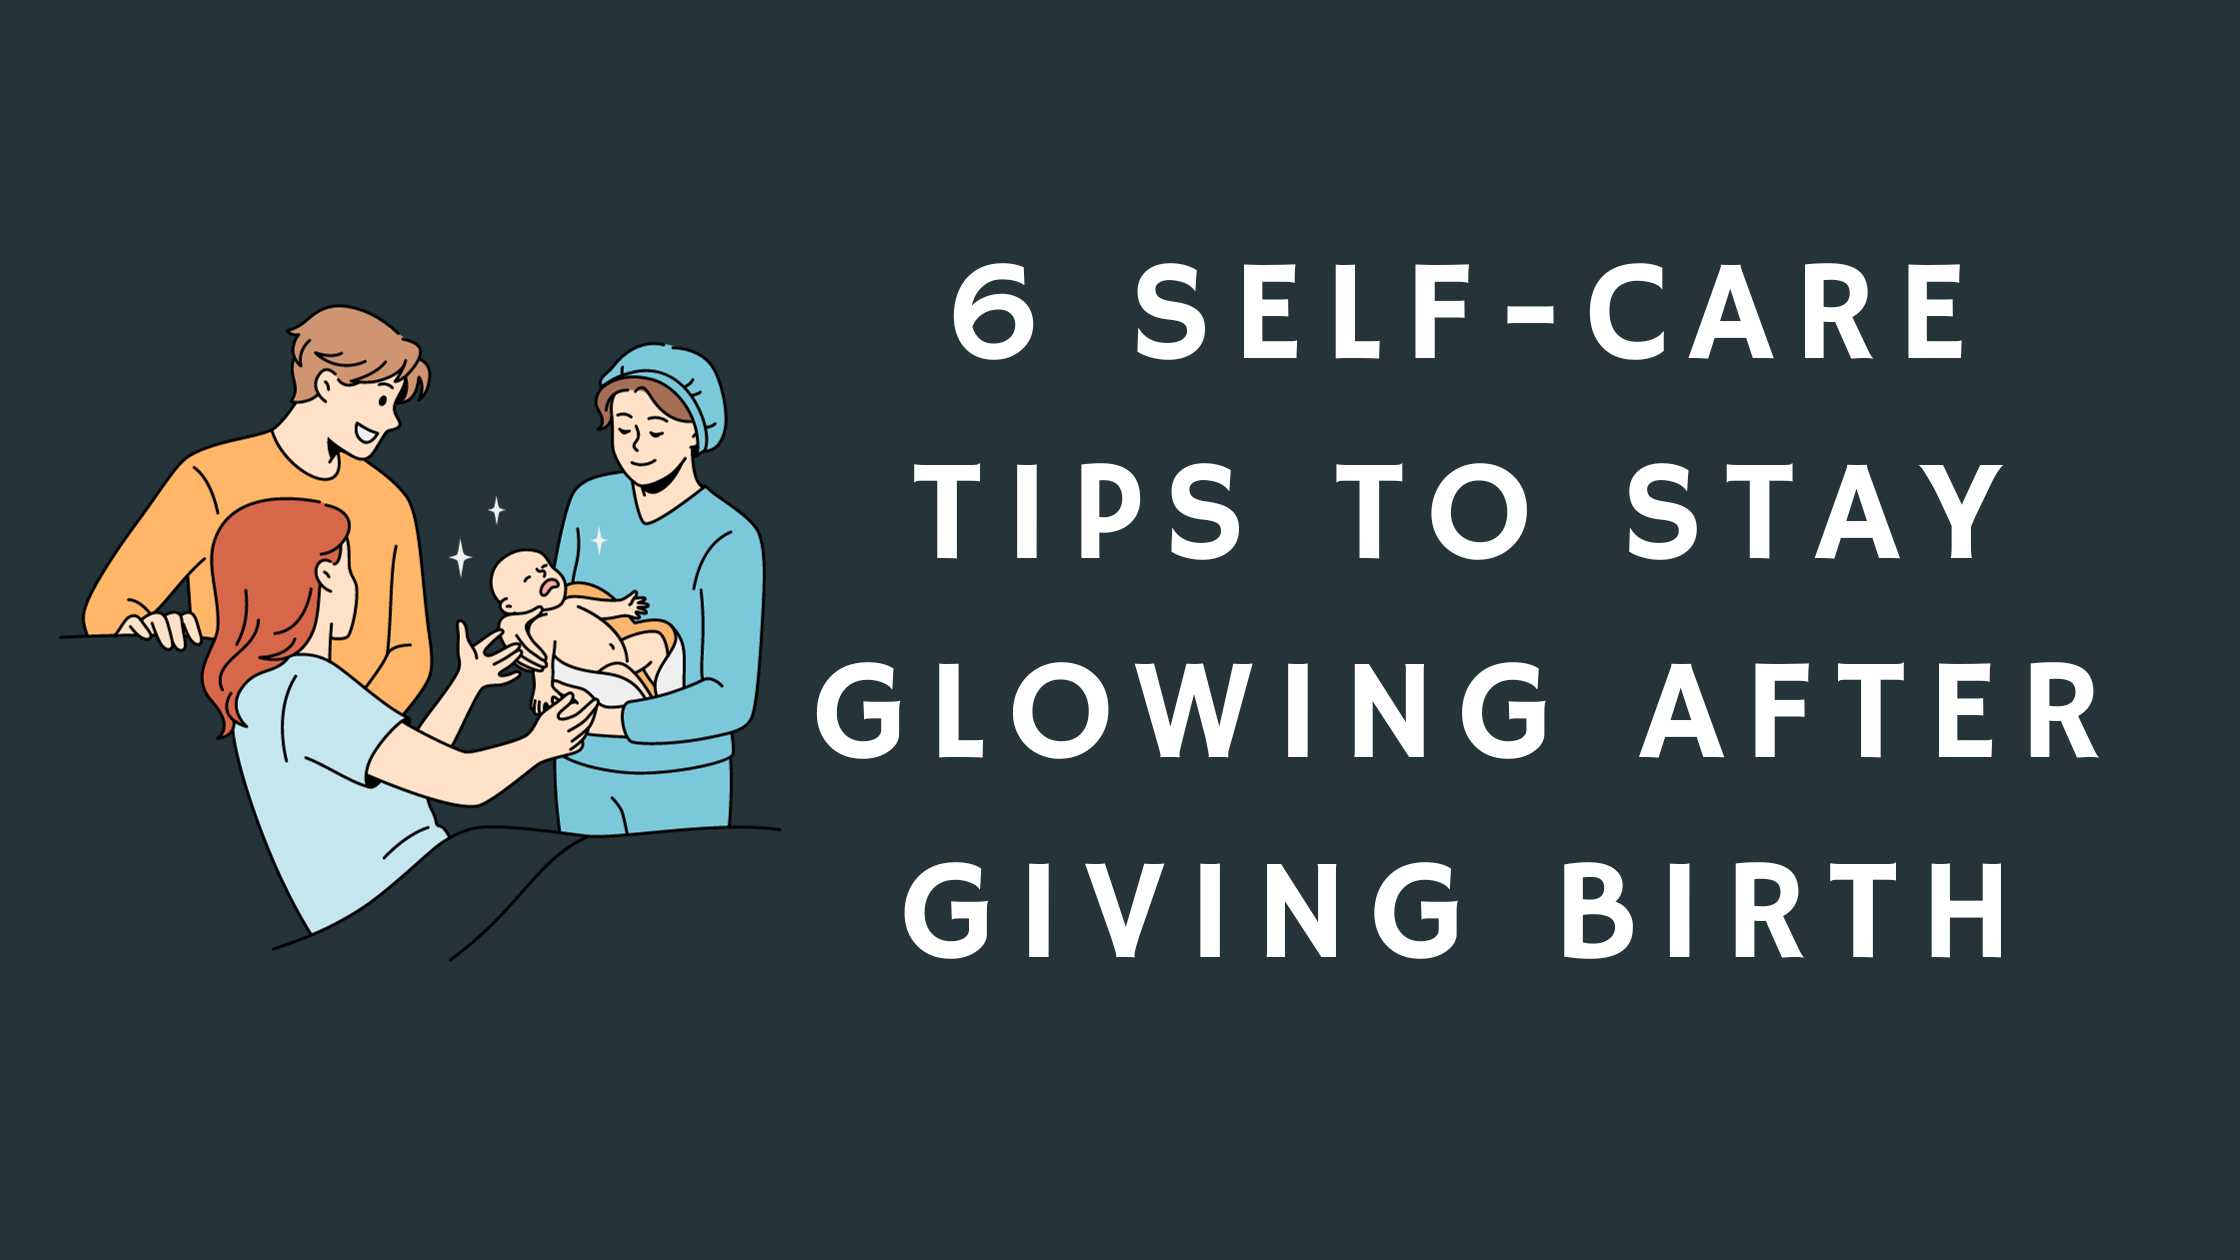 6 Self-Care Tips to Stay Glowing After Giving Birth